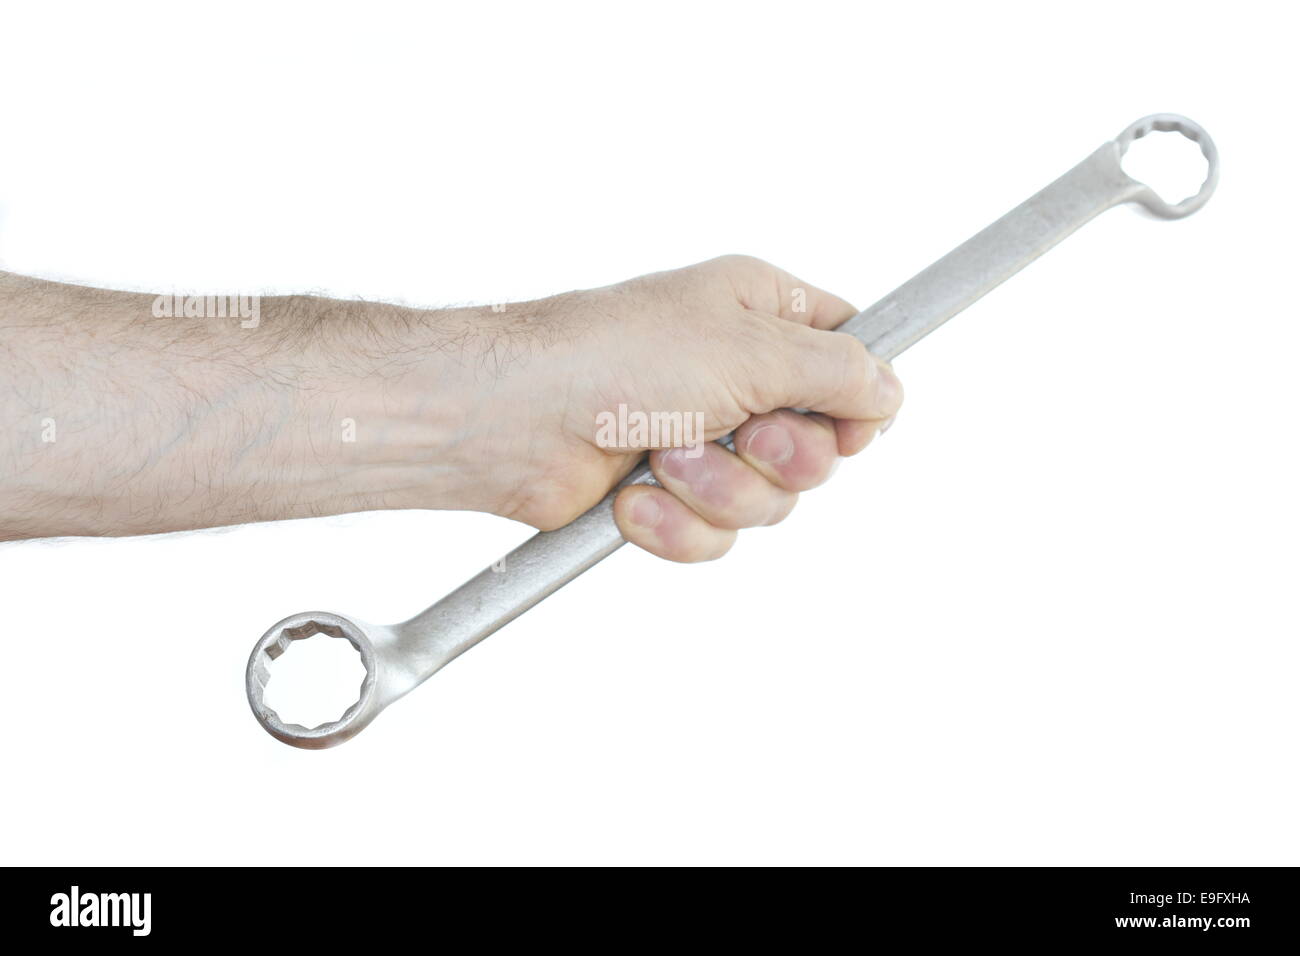 hand and working tool Stock Photo